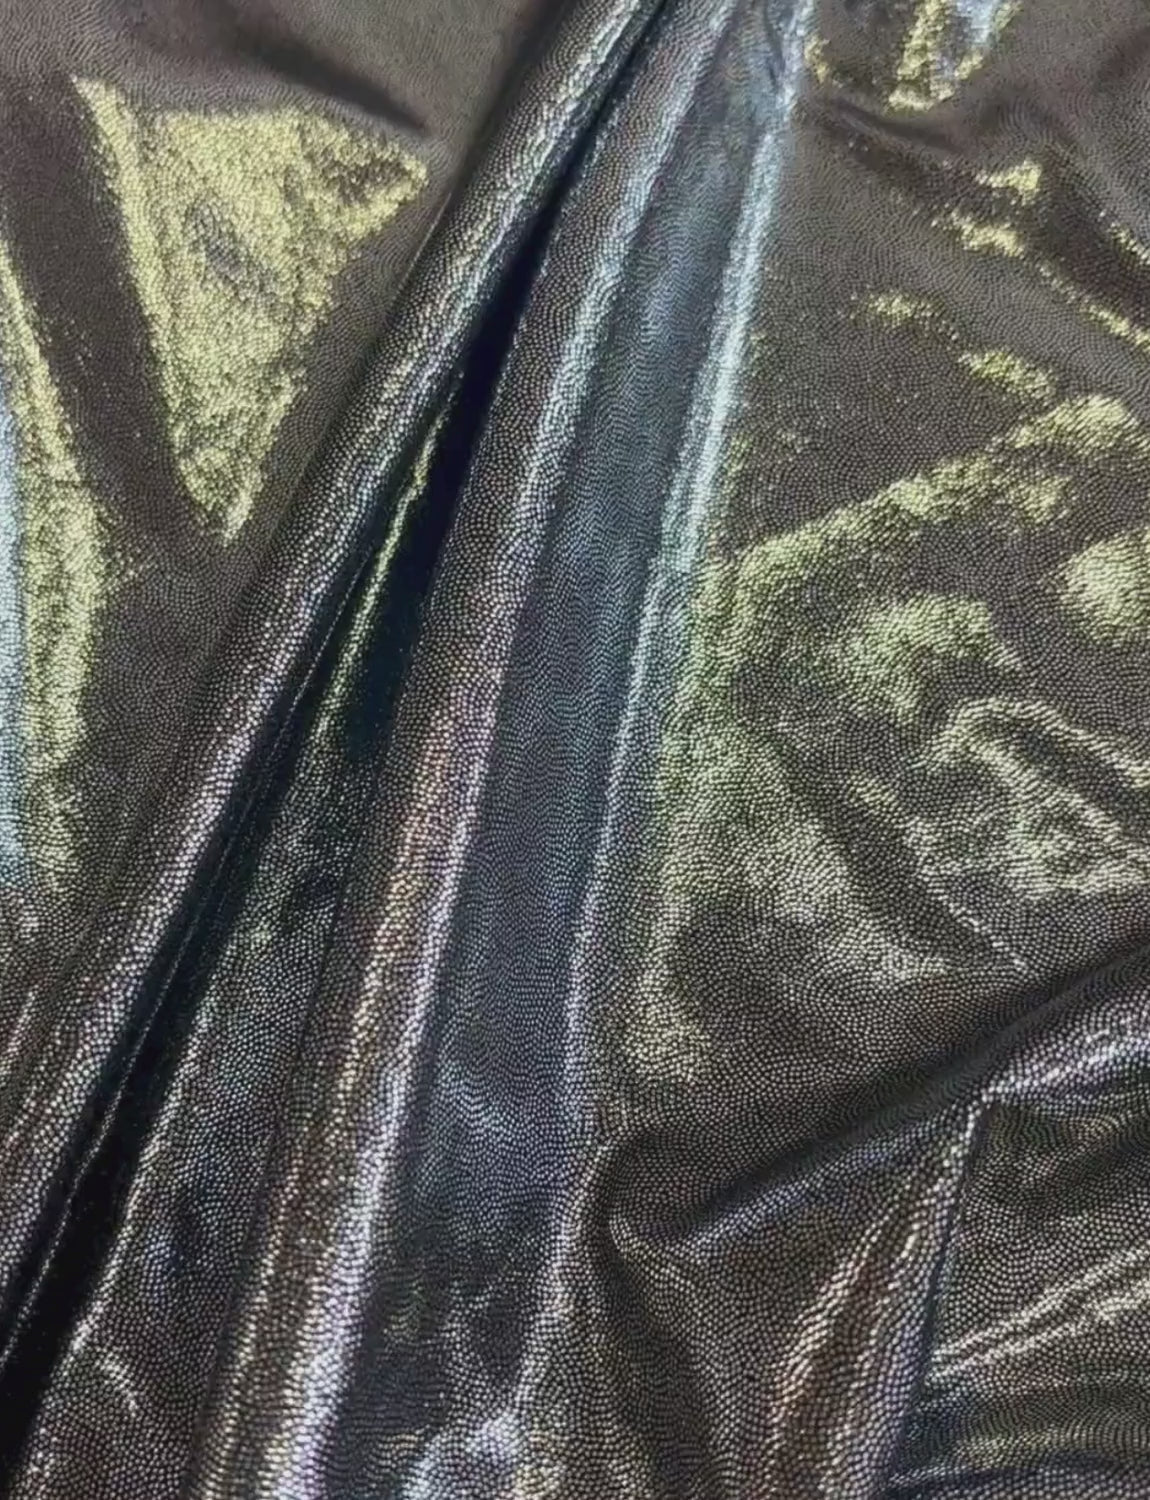 Silver foiled fabric with a black spandex base.